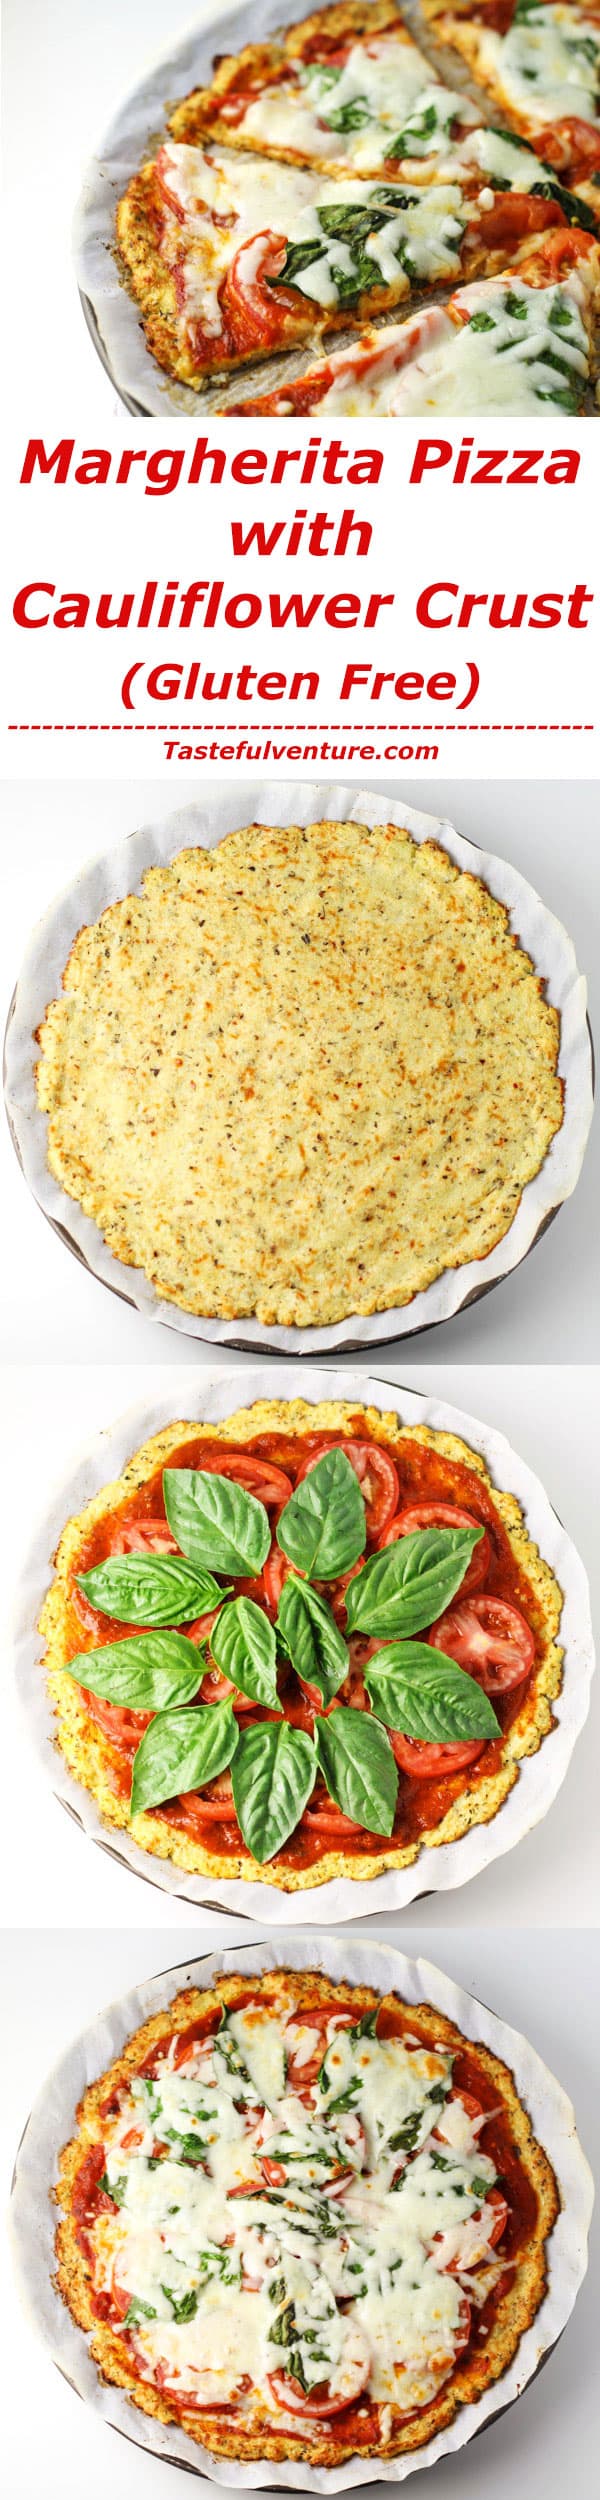 This Margherita Pizza with Cauliflower Crust tastes just like pizza without all of the calories or carbs! It's a great Gluten Free option as well! | Tastefulventure.com